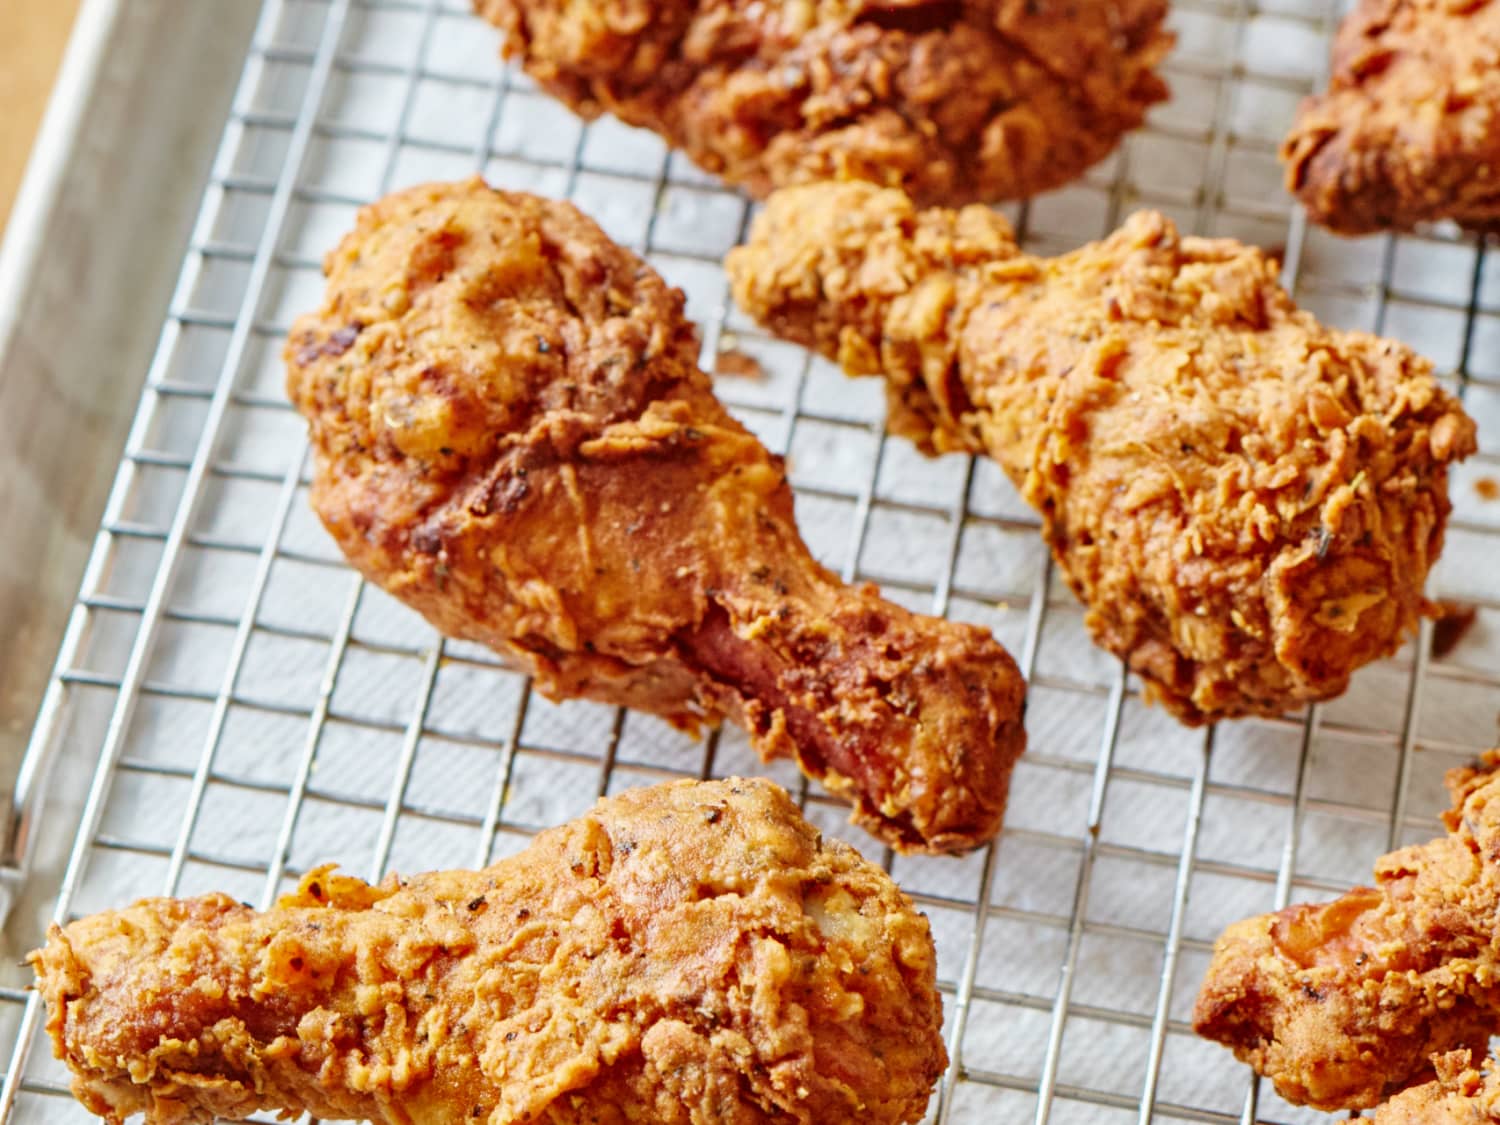 How To Make Crispy, Juicy Fried Chicken (That's Better Than KFC) | Kitchn